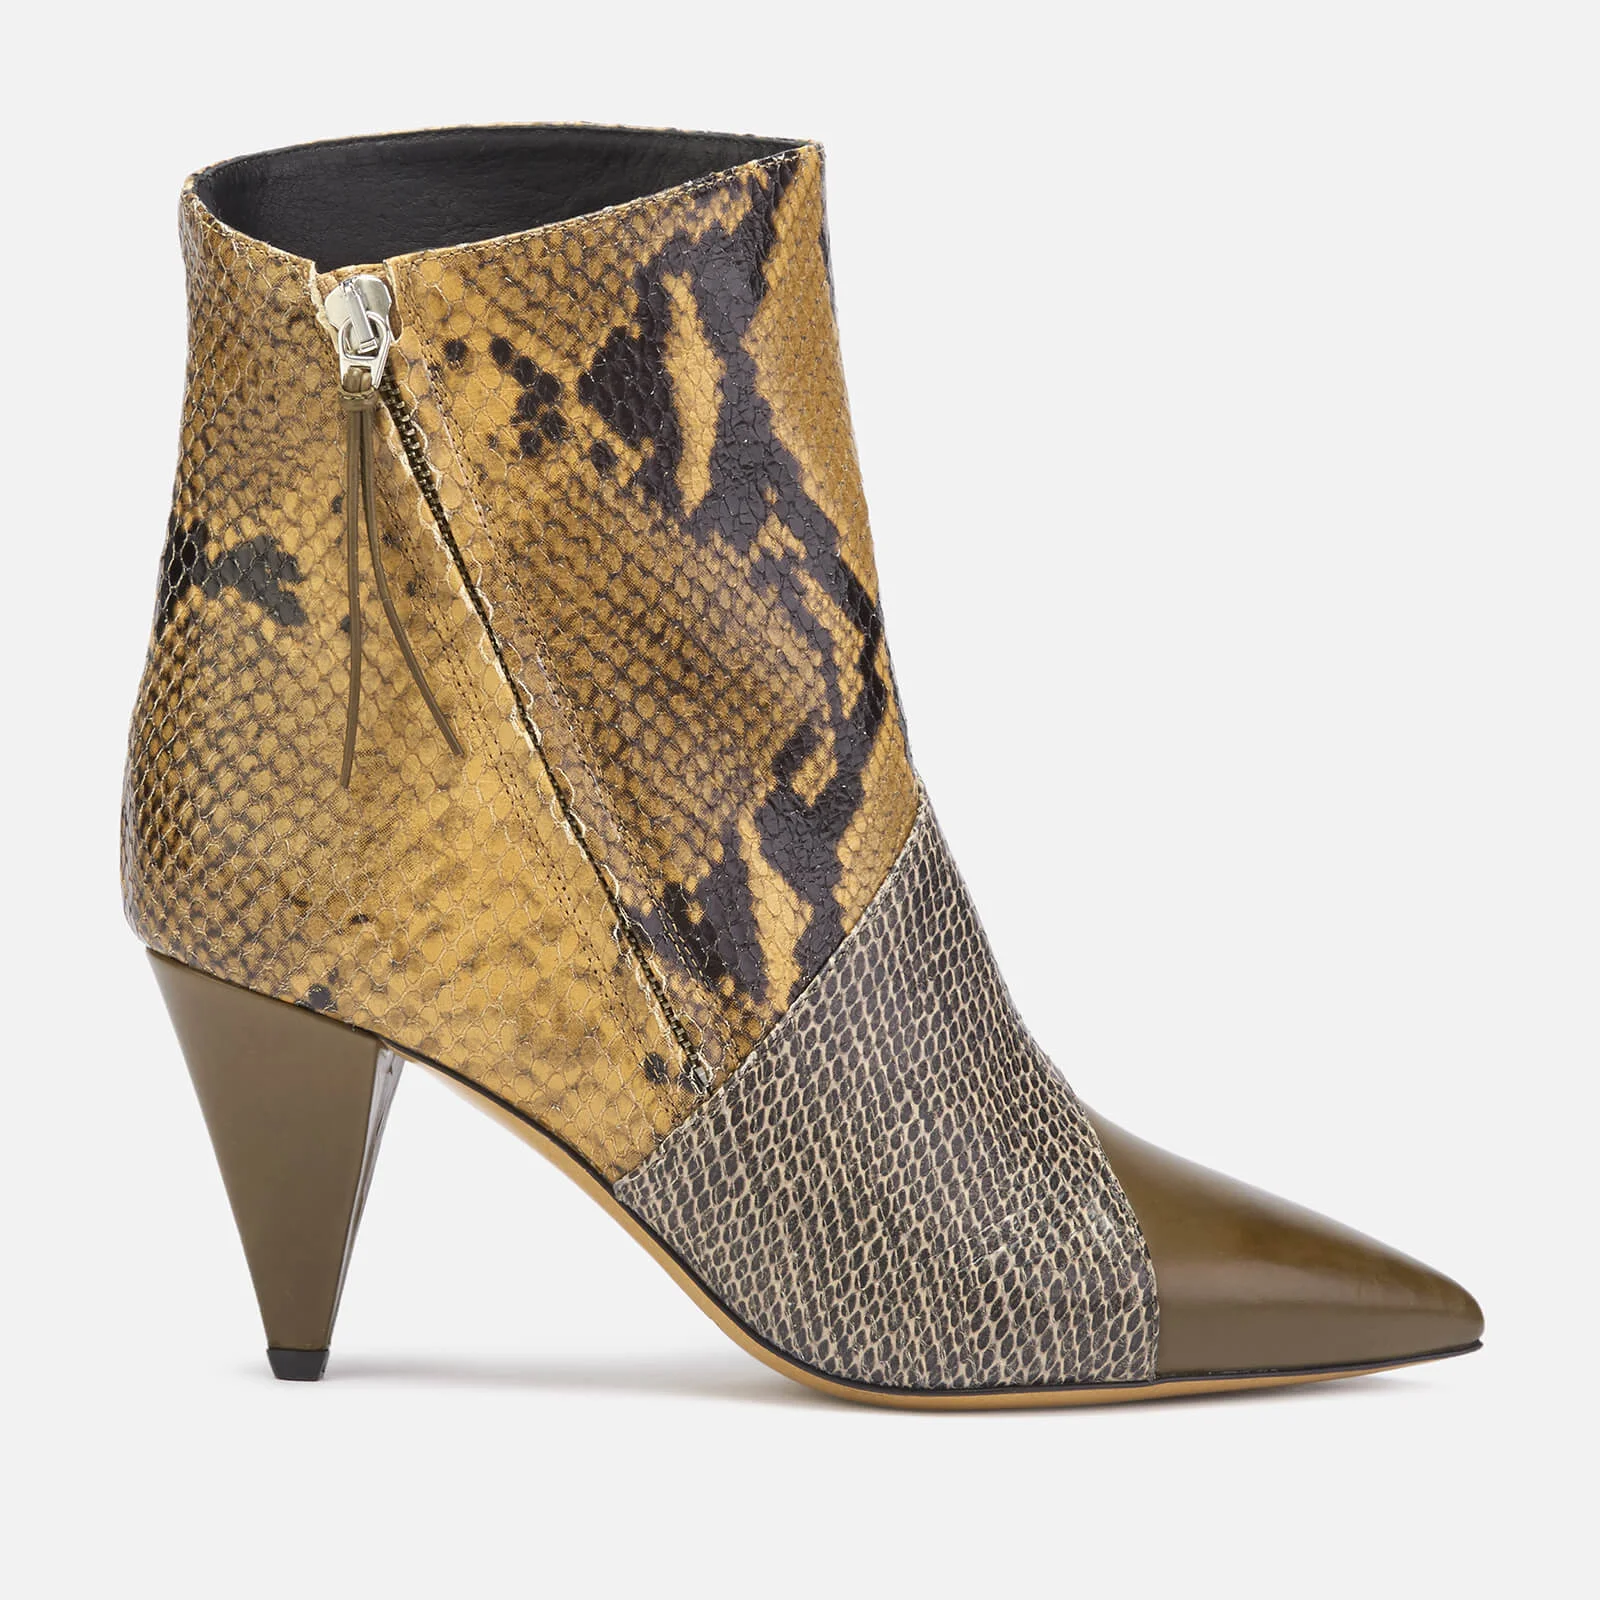 Isabel Marant Women's Latts Exotic Patchwork Ankle Boots - Taupe/Camel Image 1